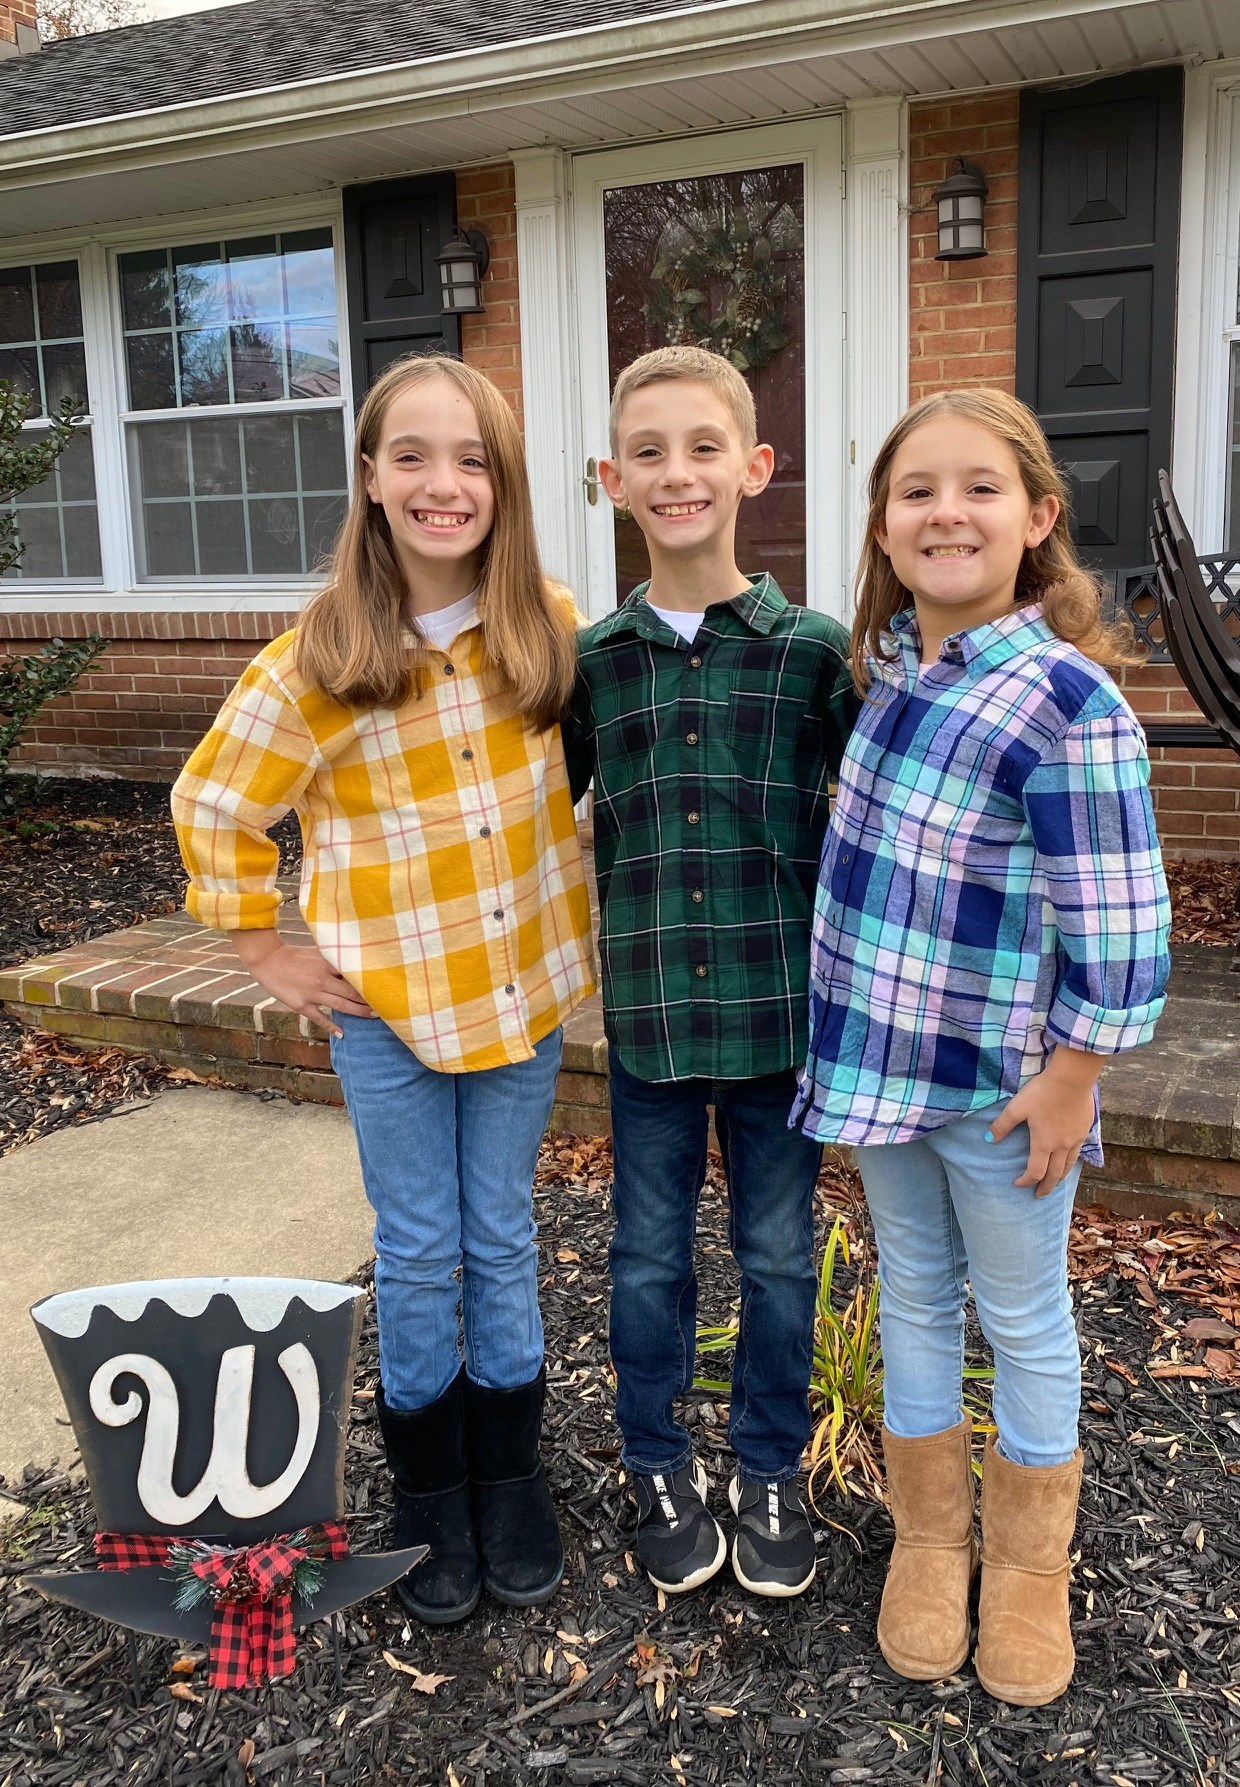 The Warren triplets today (from left) Addison, Aidan, and Ashley.